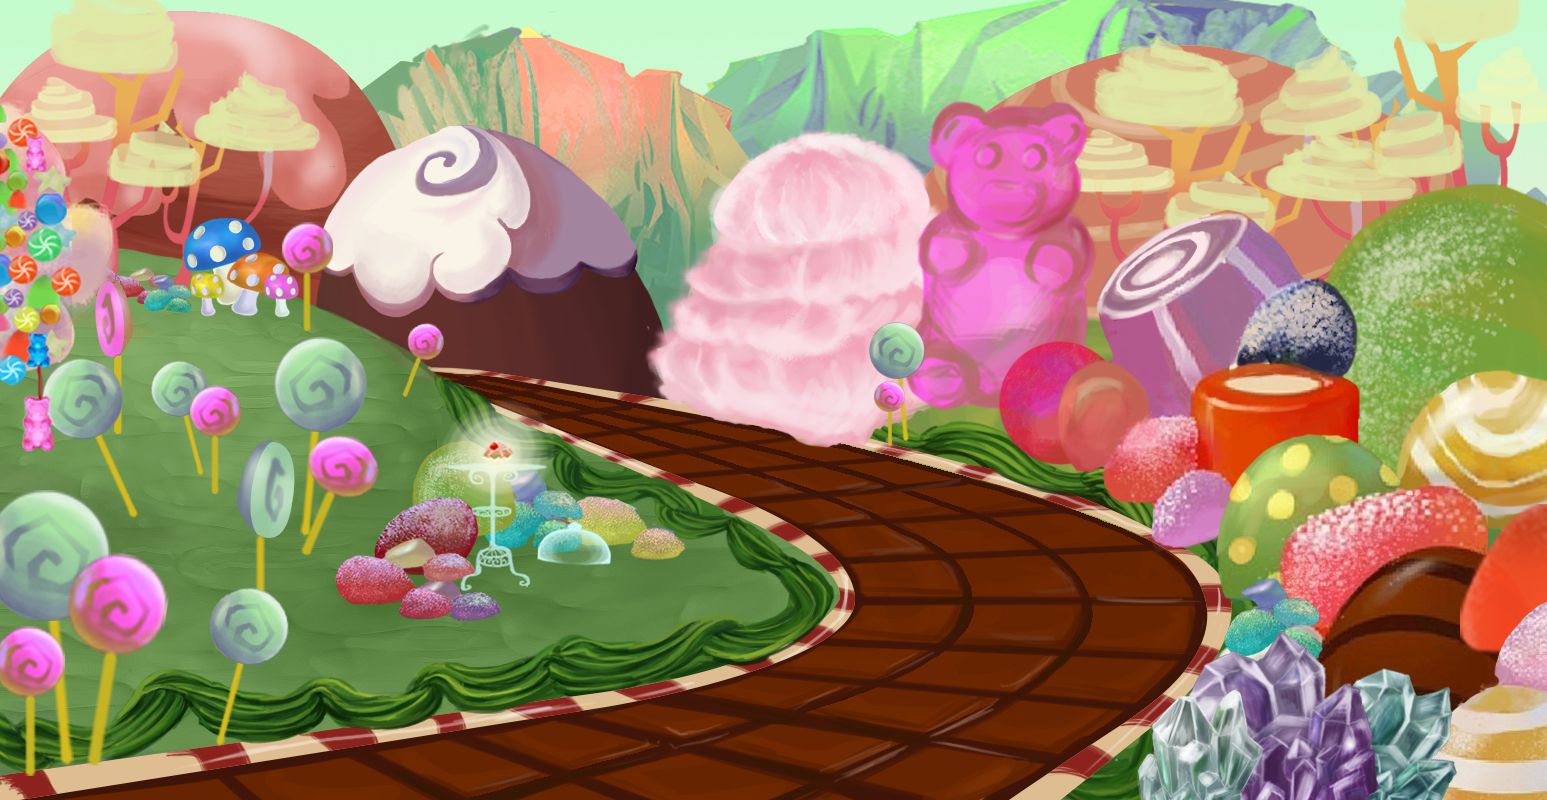 Candyland Background For My Production Class Edible Kingdoms In